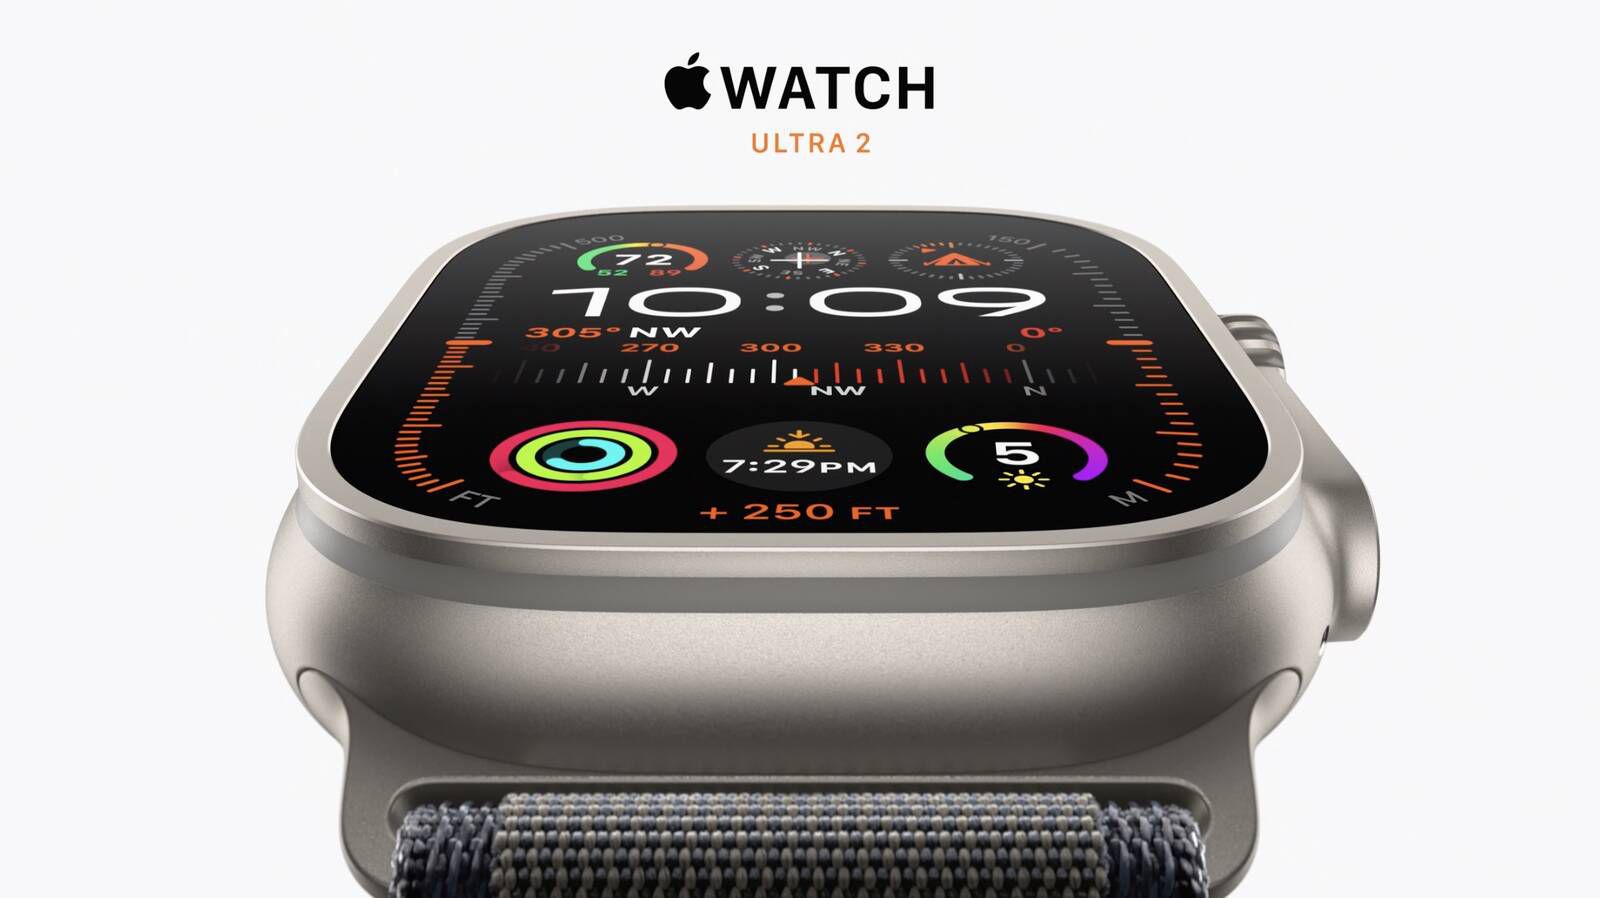 Apple Watch Ultra 2 Already Facing 6-7 Week Shipping Delay for Some Configurations